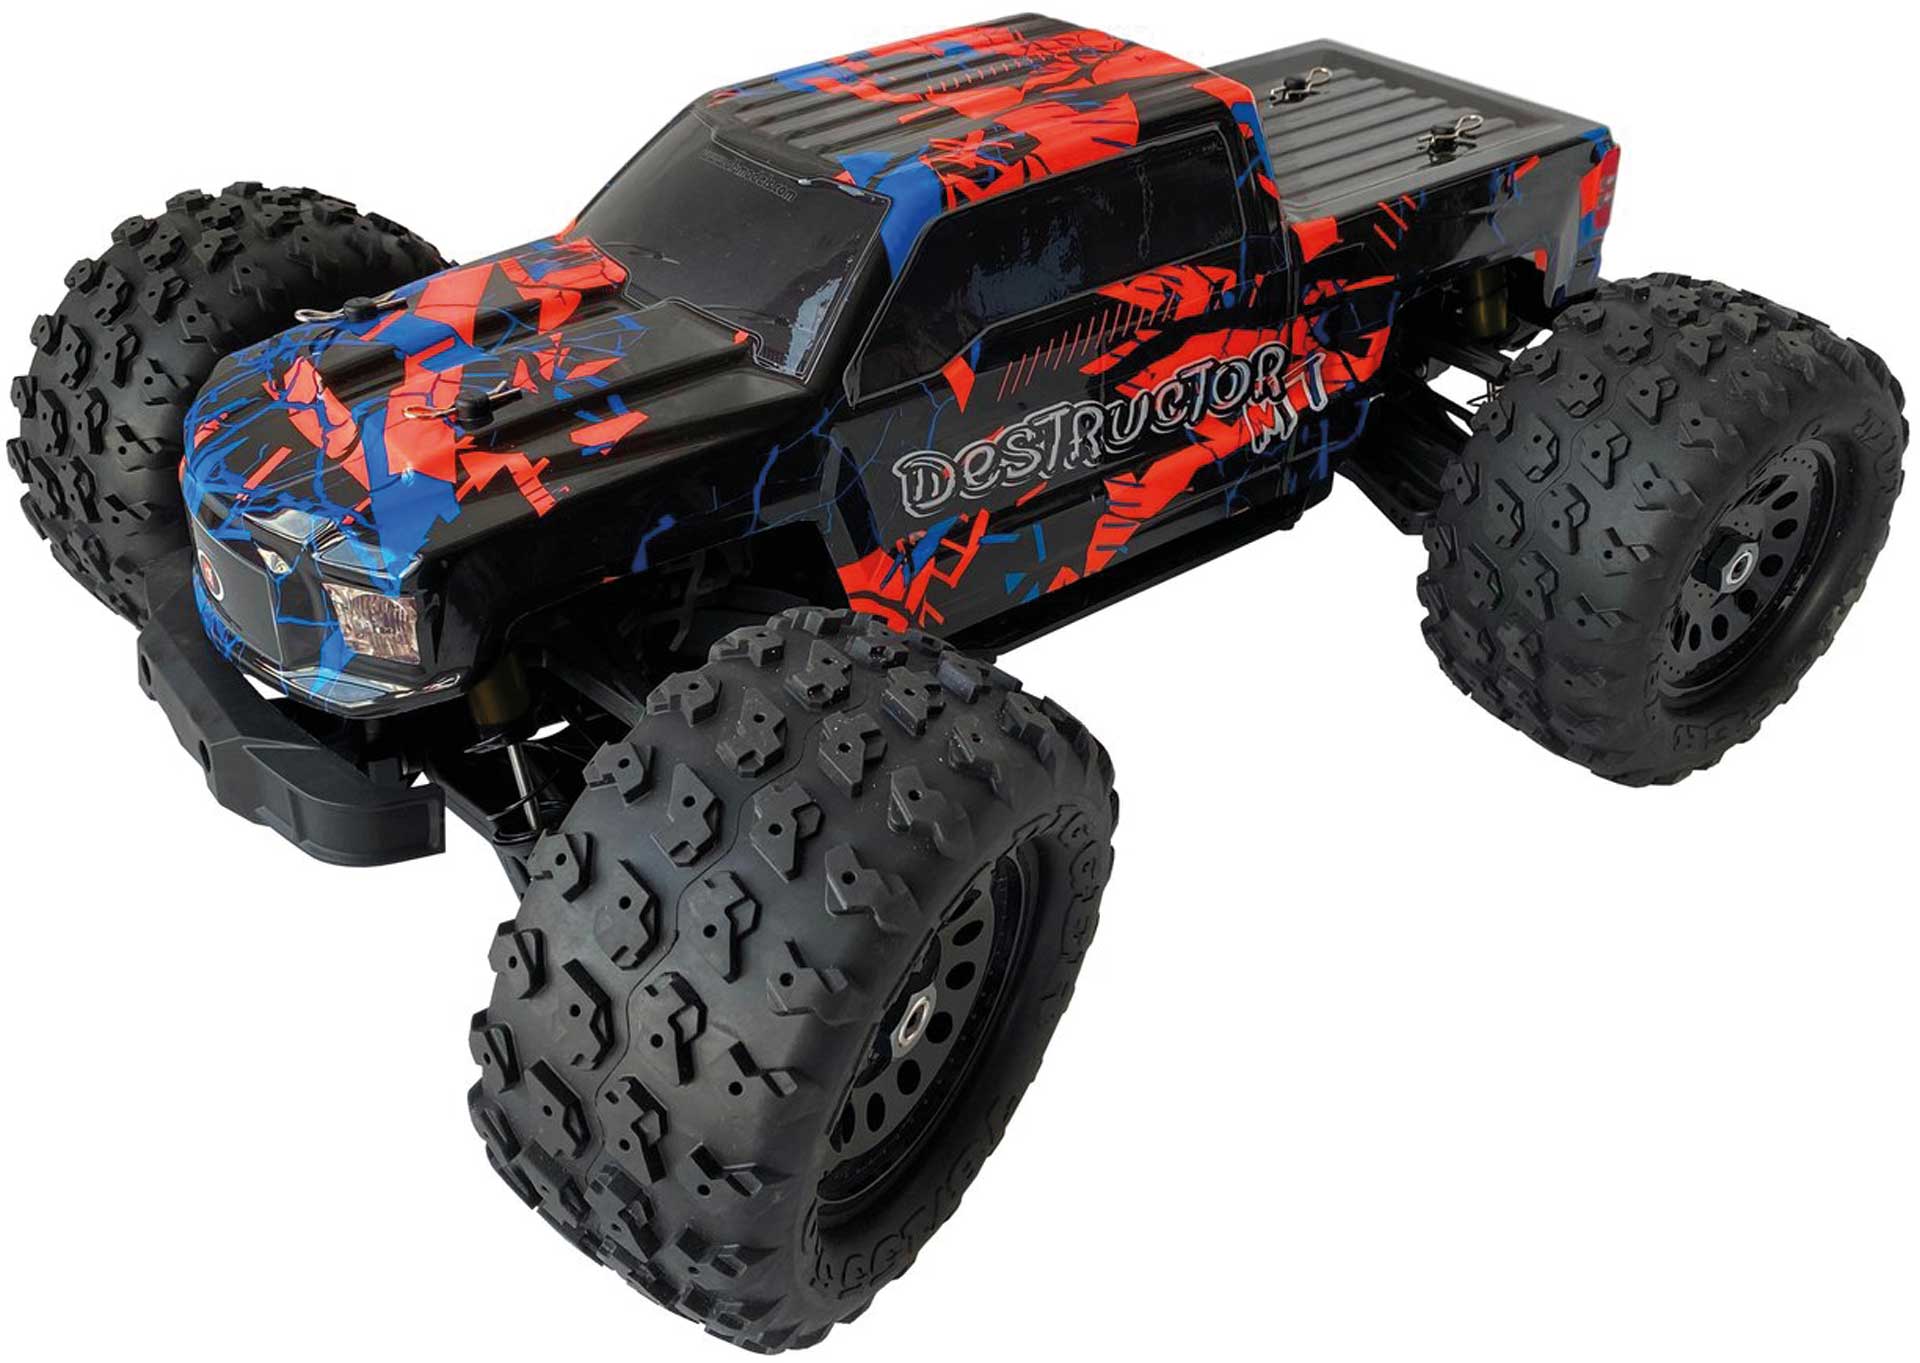 DRIVE & FLY MODELS Destructor MT 1/8 Truck Brushless RTR 4WD EP